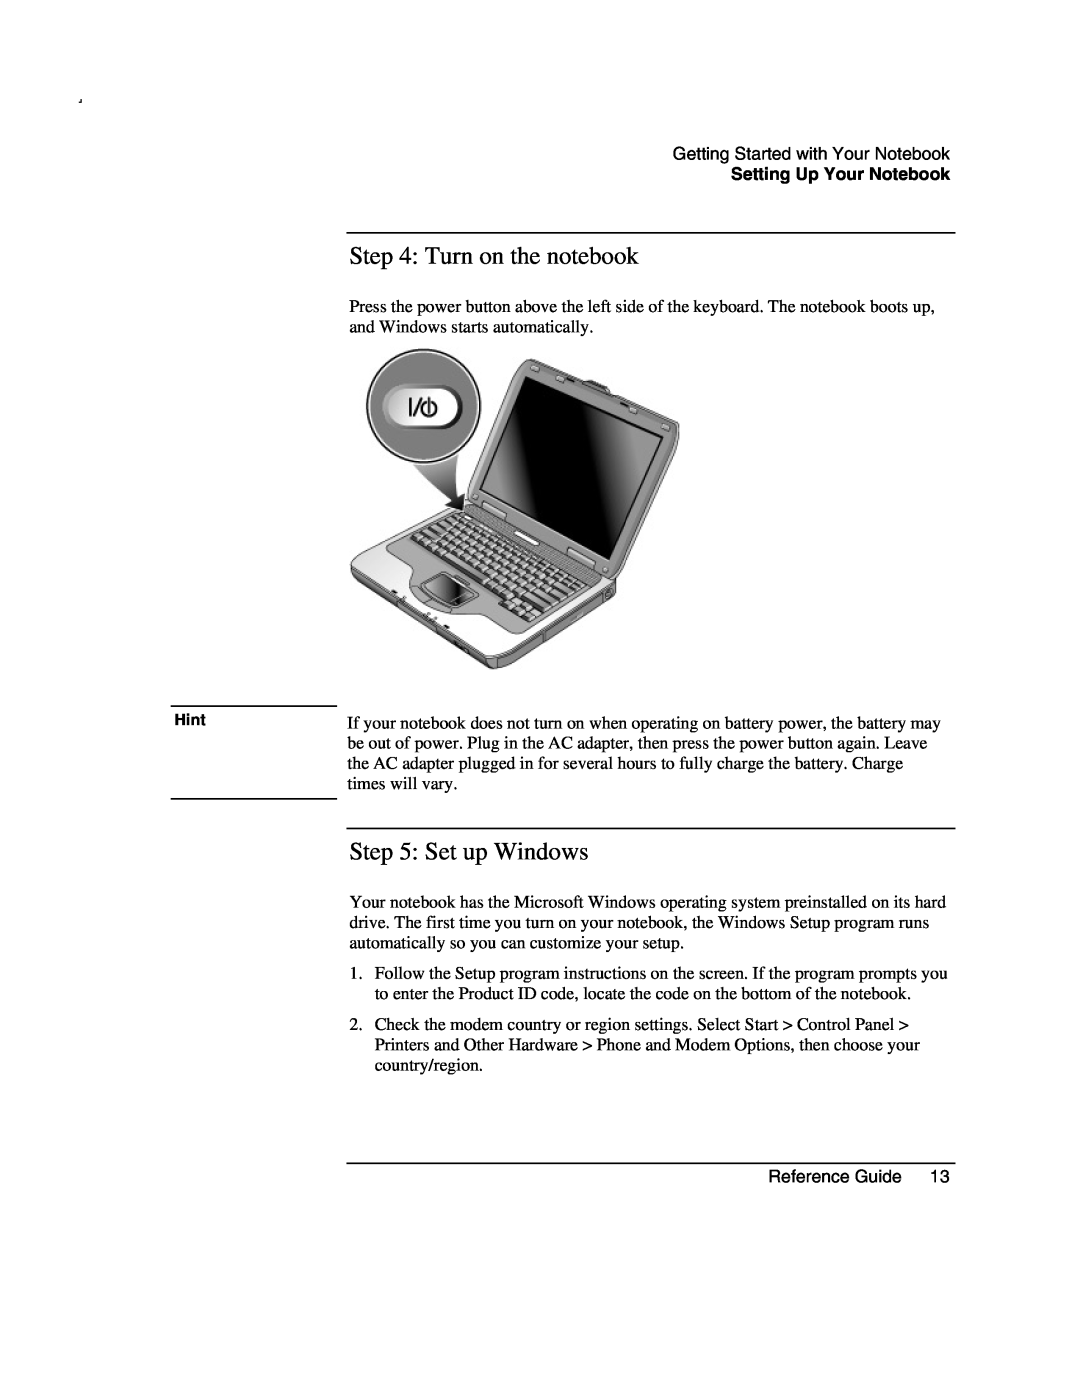 Compaq AMC20493-KT5 manual Turn on the notebook, Set up Windows, Setting Up Your Notebook 